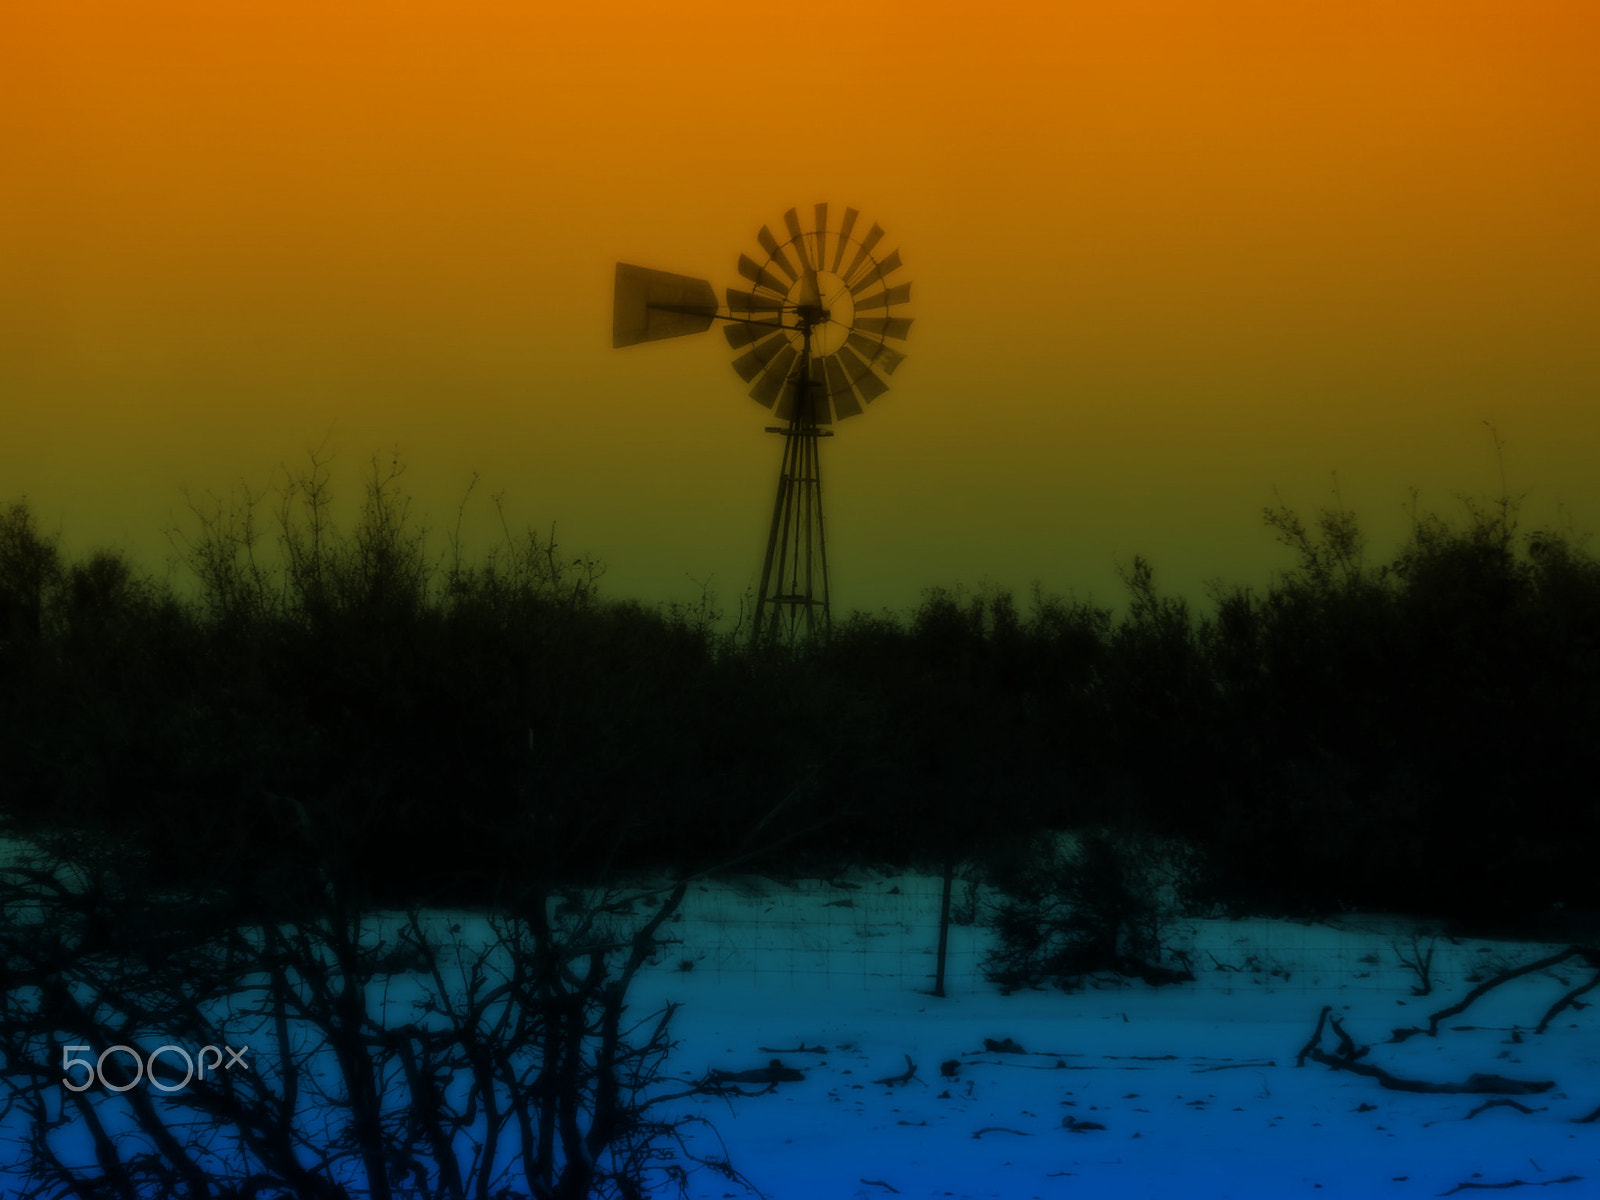 Olympus SZ-12 sample photo. This old windmill photography